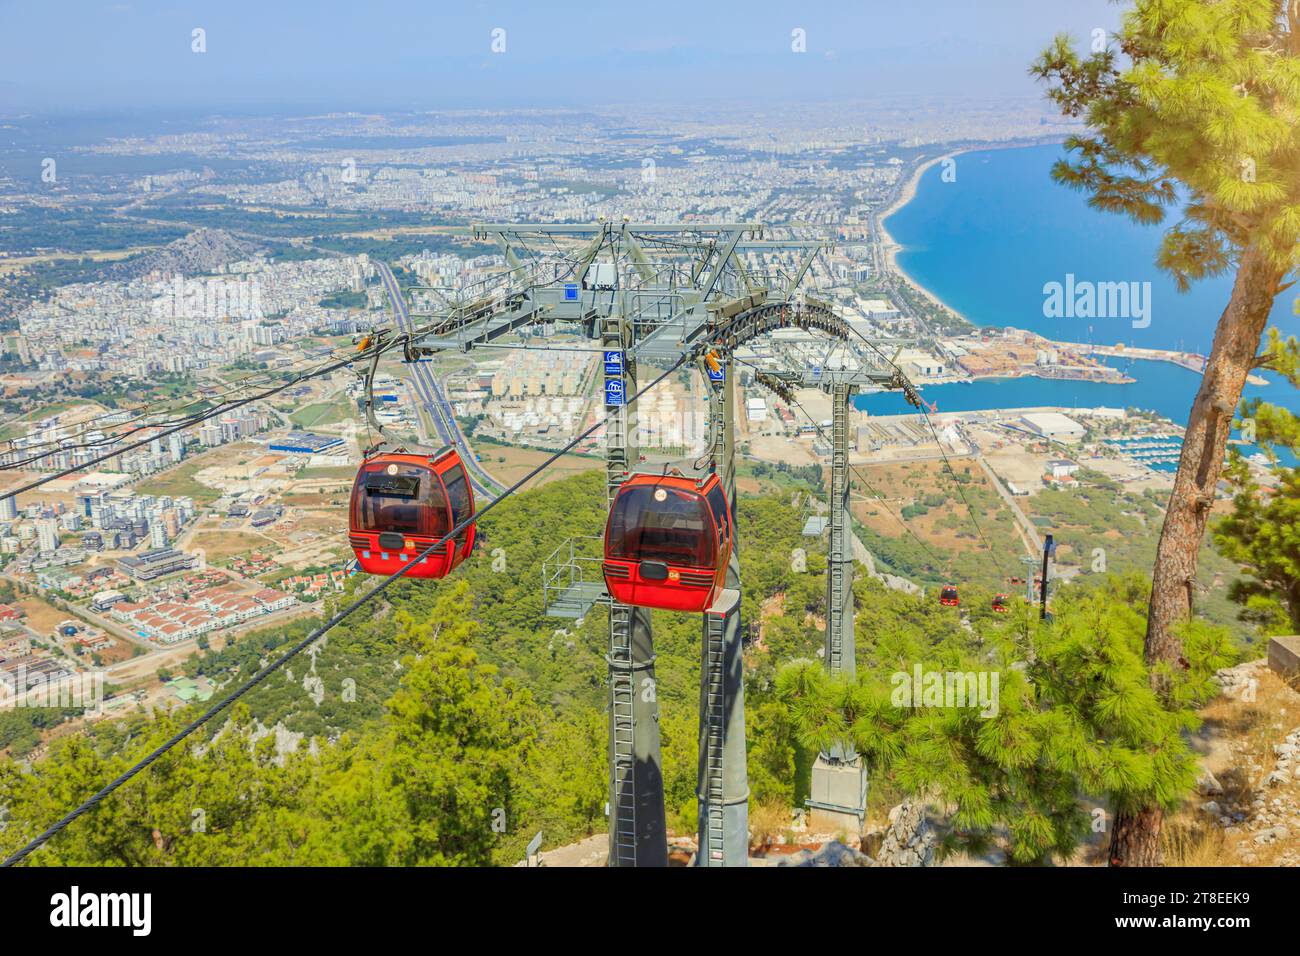 In the picturesque scenery of Antalya, Turkey, a dynamic red cable car gracefully ascends. Against the backdrop of Tunektepe mountain peak, soaring Stock Photo